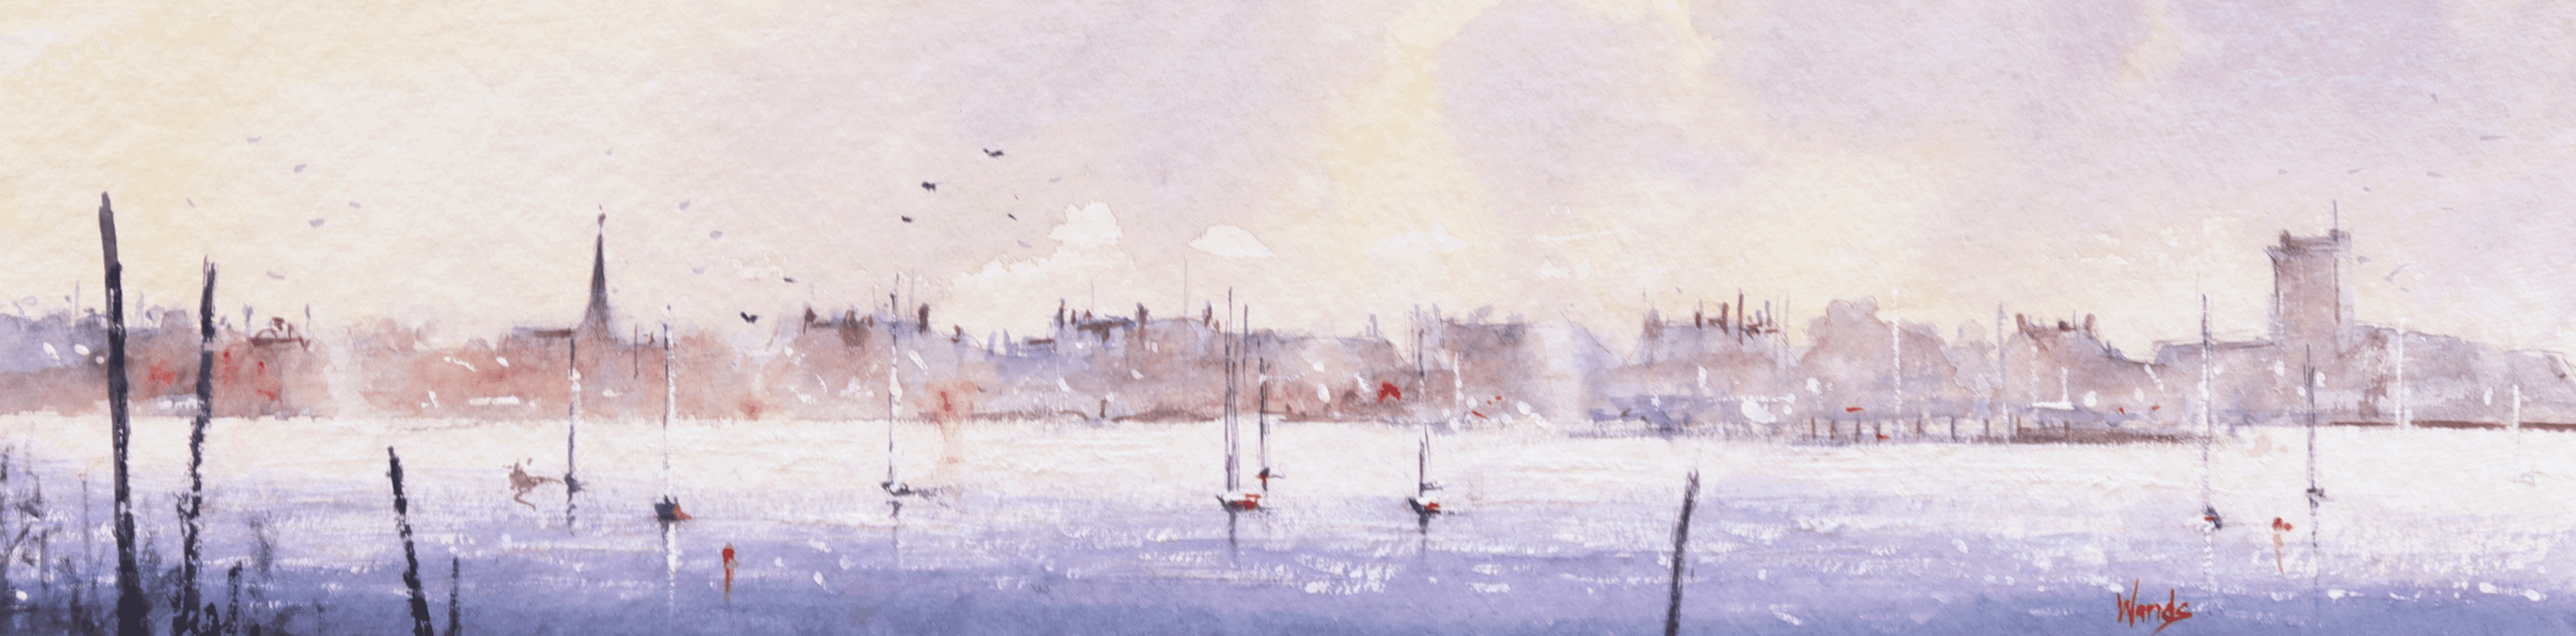 Graham_Wands_Boats_Across_The_Tay_Broughty_Ferry